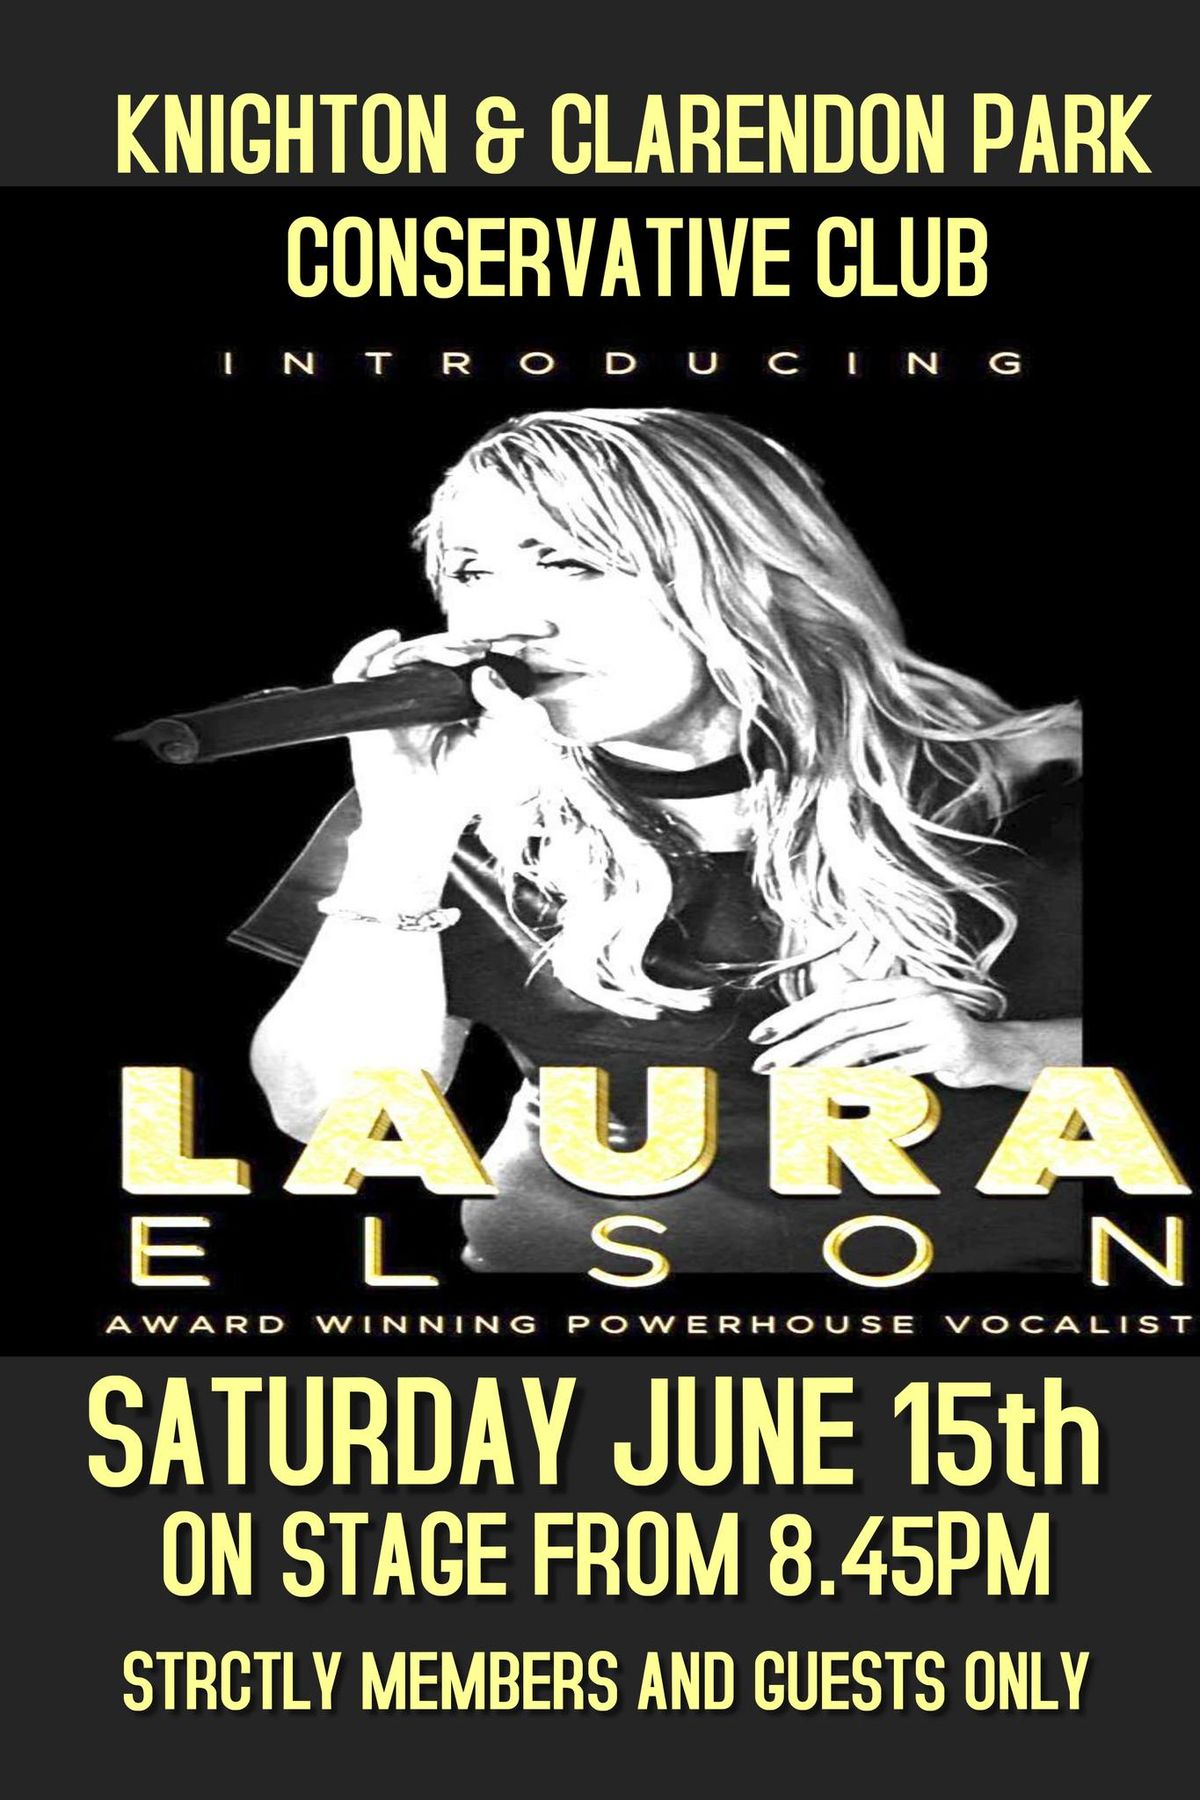 LIVE MUSIC WITH LAURA ELSON 